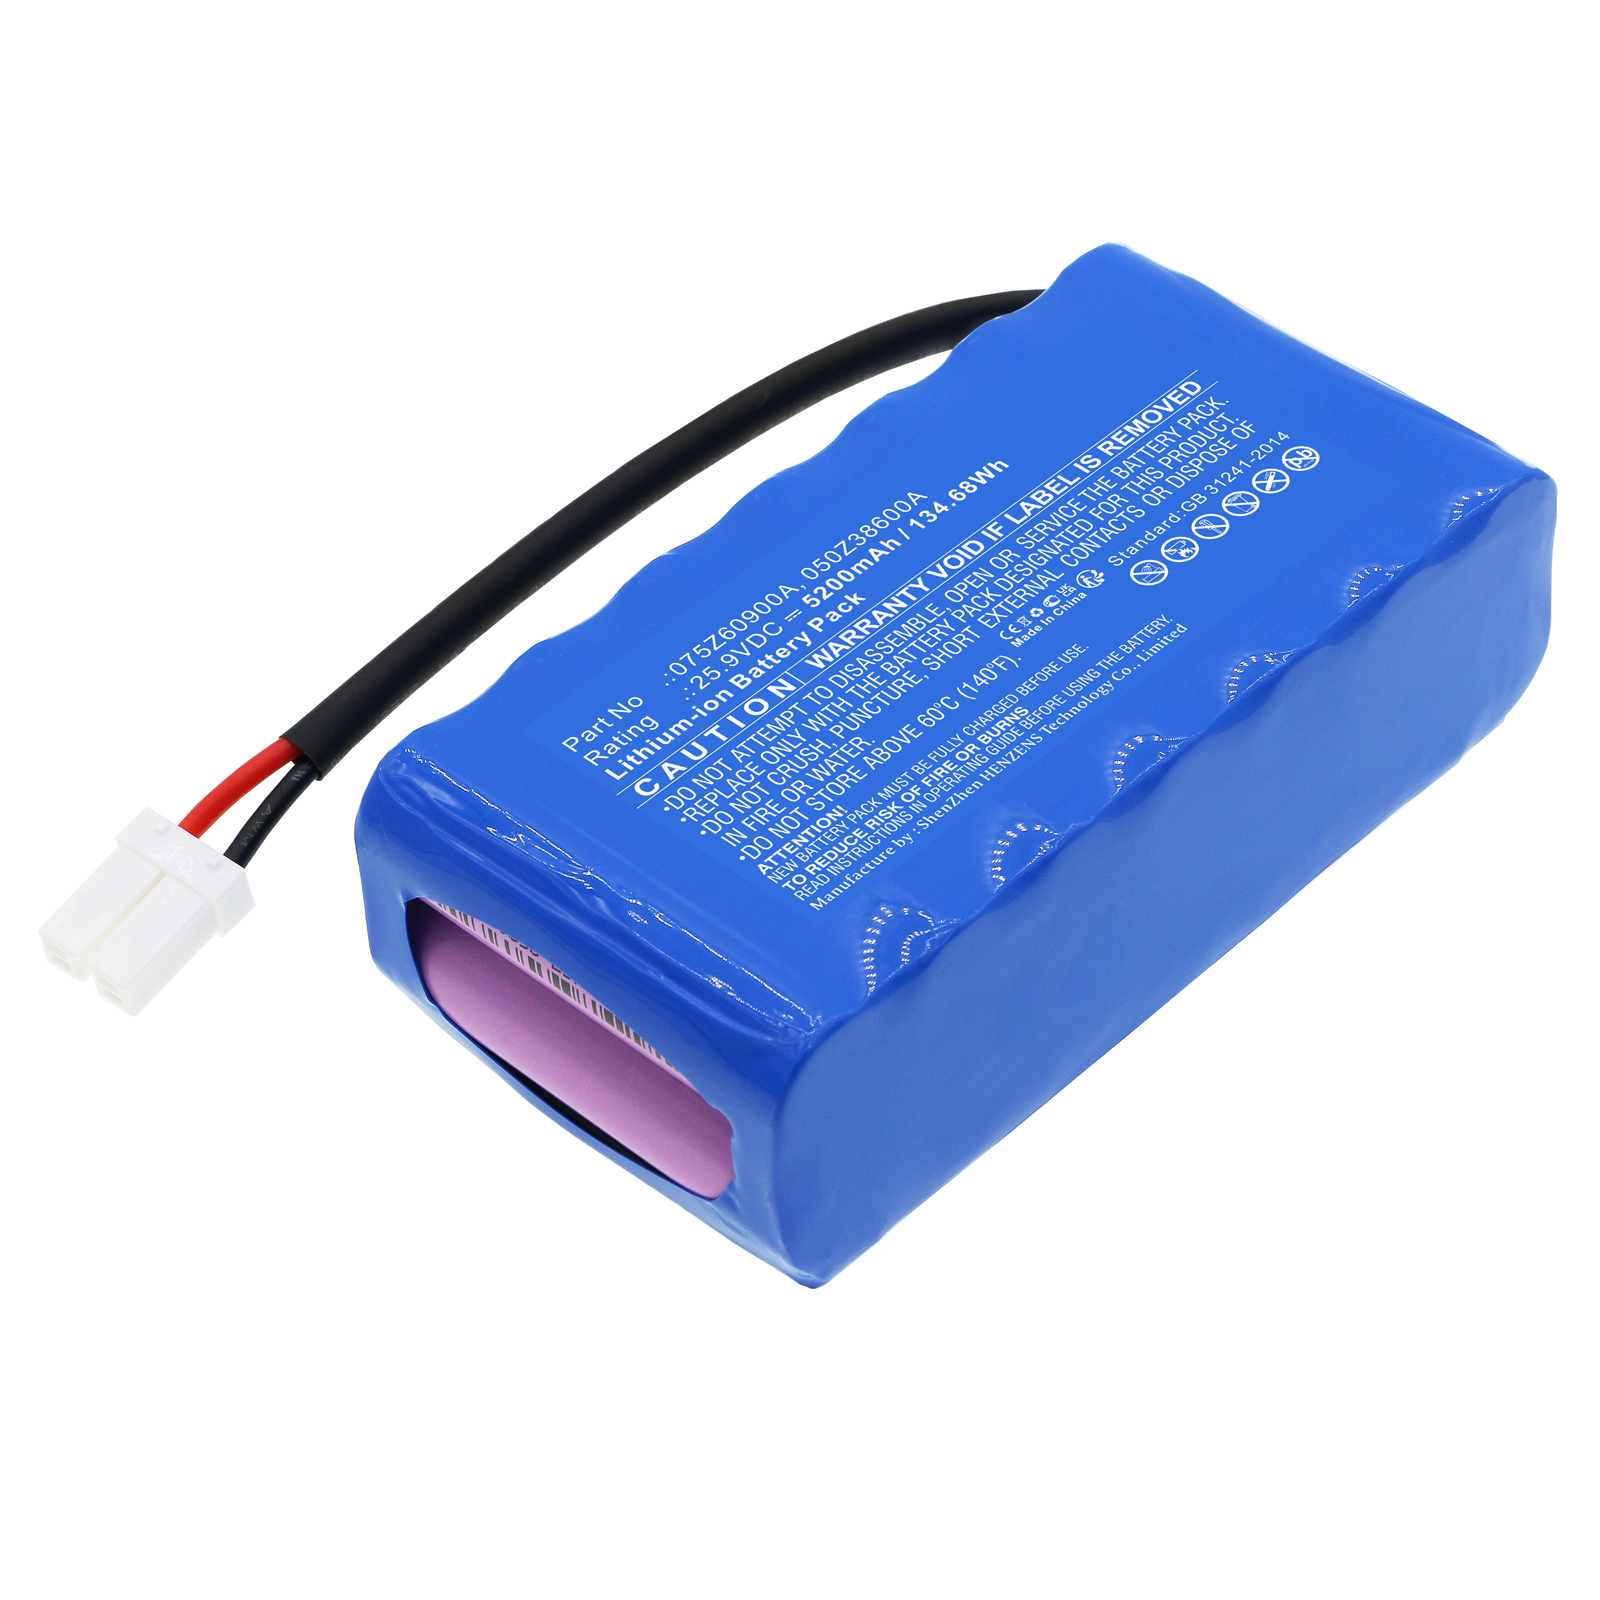 Synergy Digital Lawn Mower Battery, Compatible with Ambrogio 050Z38600A Lawn Mower Battery (Li-ion, 25.9V, 5200mAh)